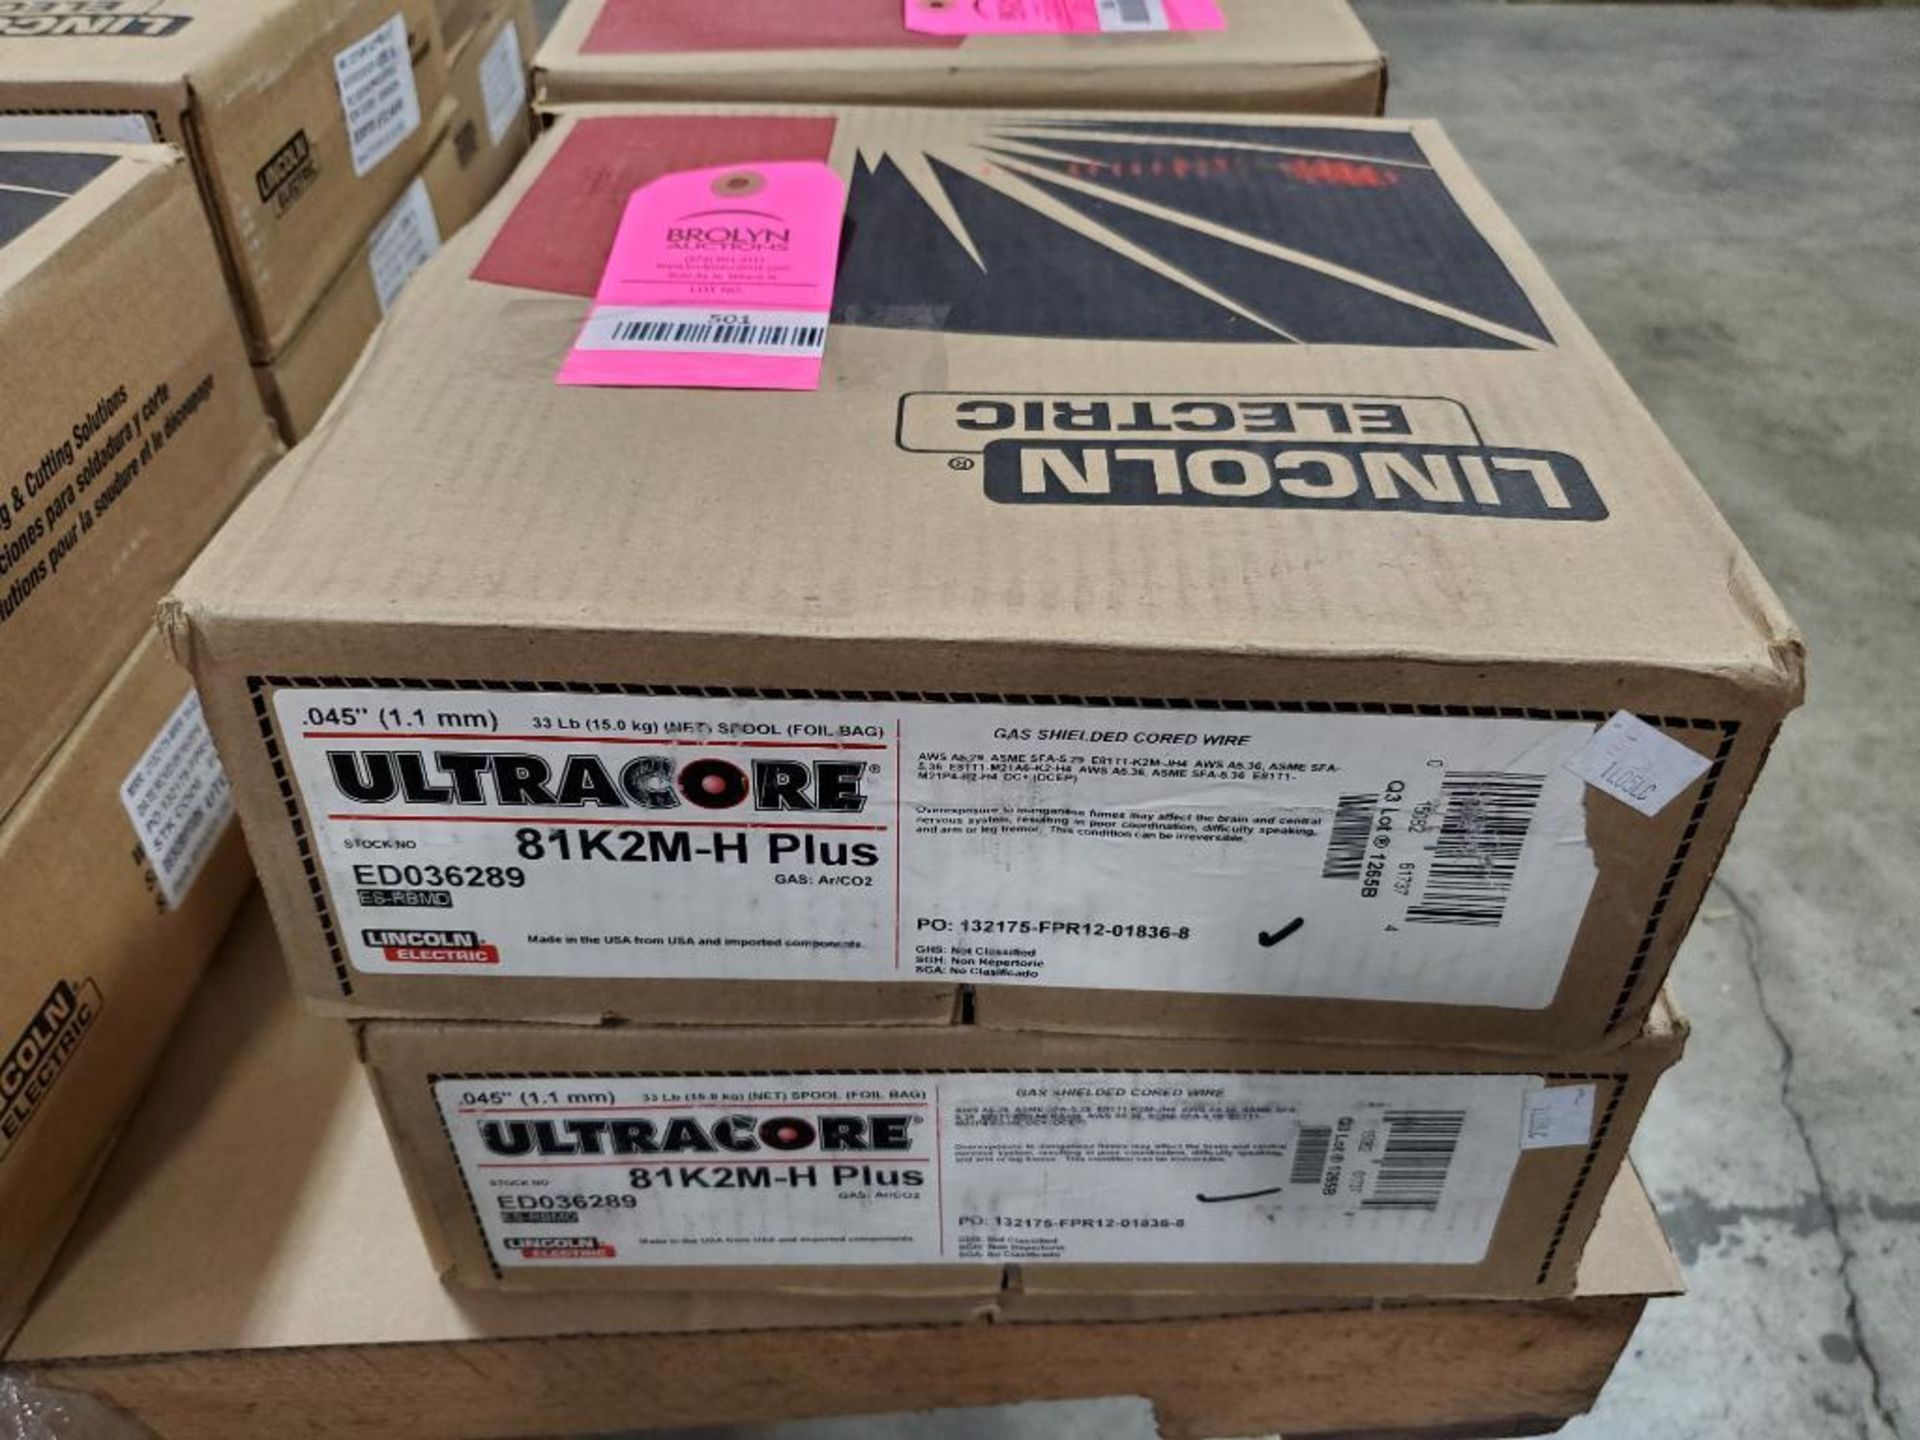 Qty 2 - Lincoln Electric Ultracore 81K2M-H Plus .045", 33LB gas shielded cored wire.